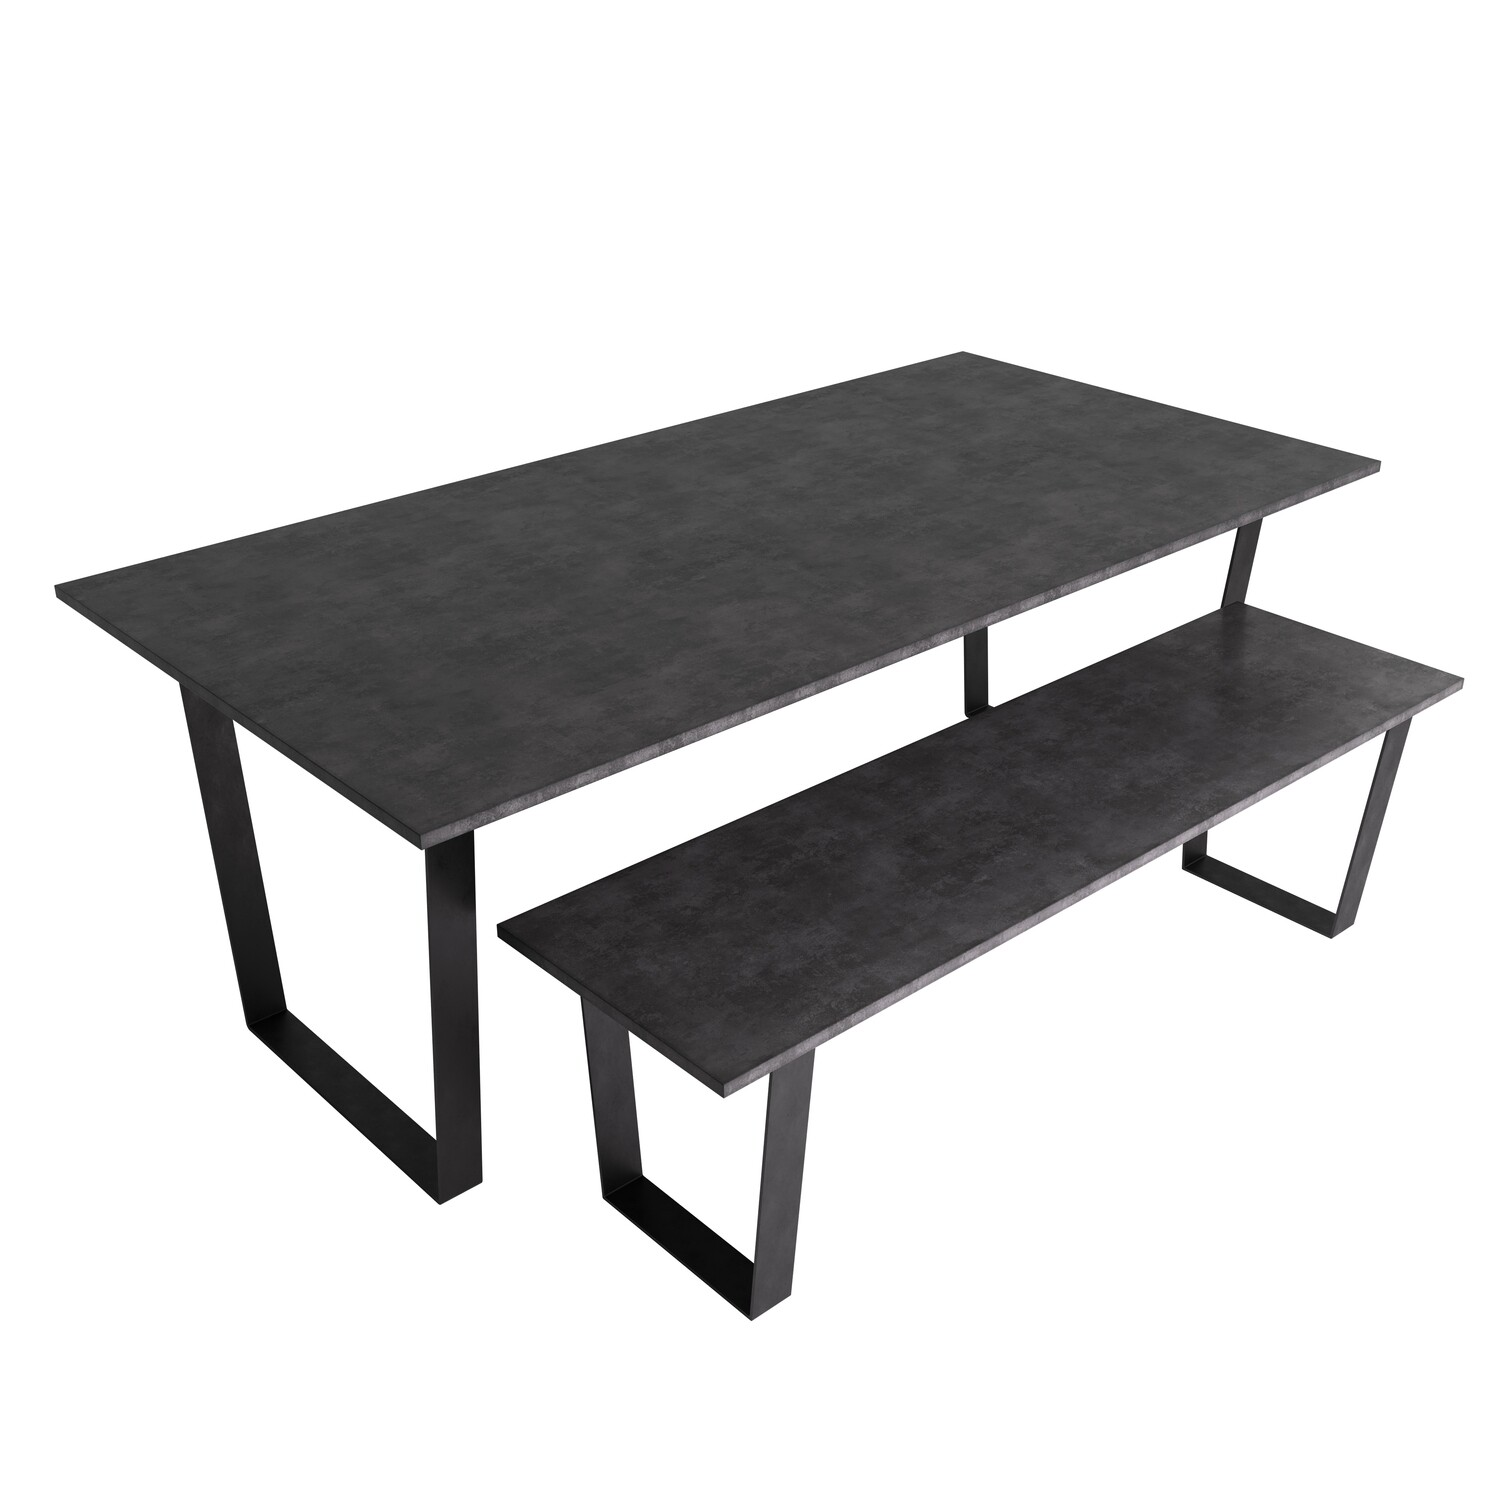 Theo Black concrete dining table